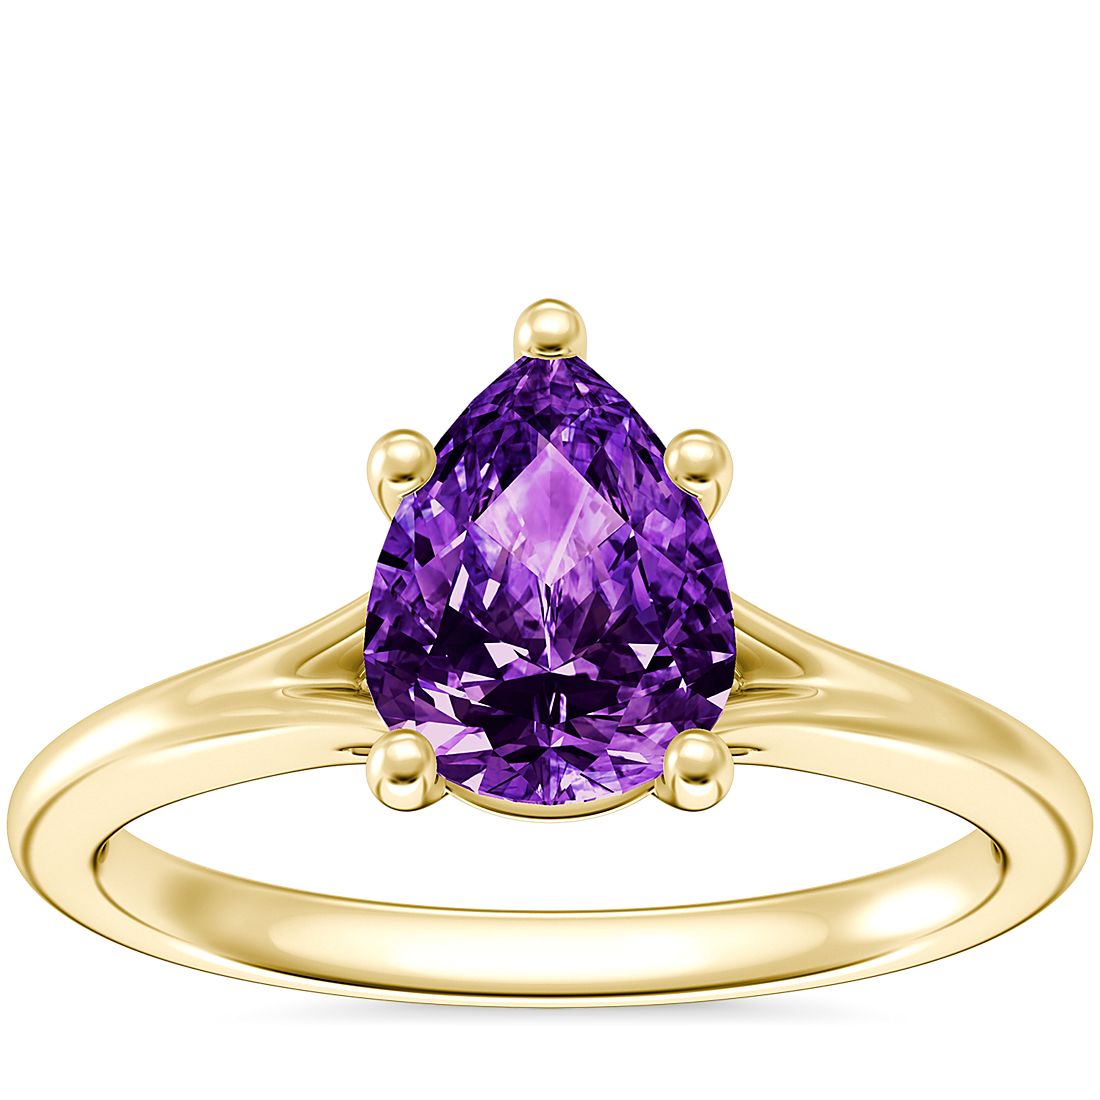 Petite Split Shank Solitaire Engagement Ring with Pear-Shaped Amethyst in 18k Yellow Gold (8x6mm)